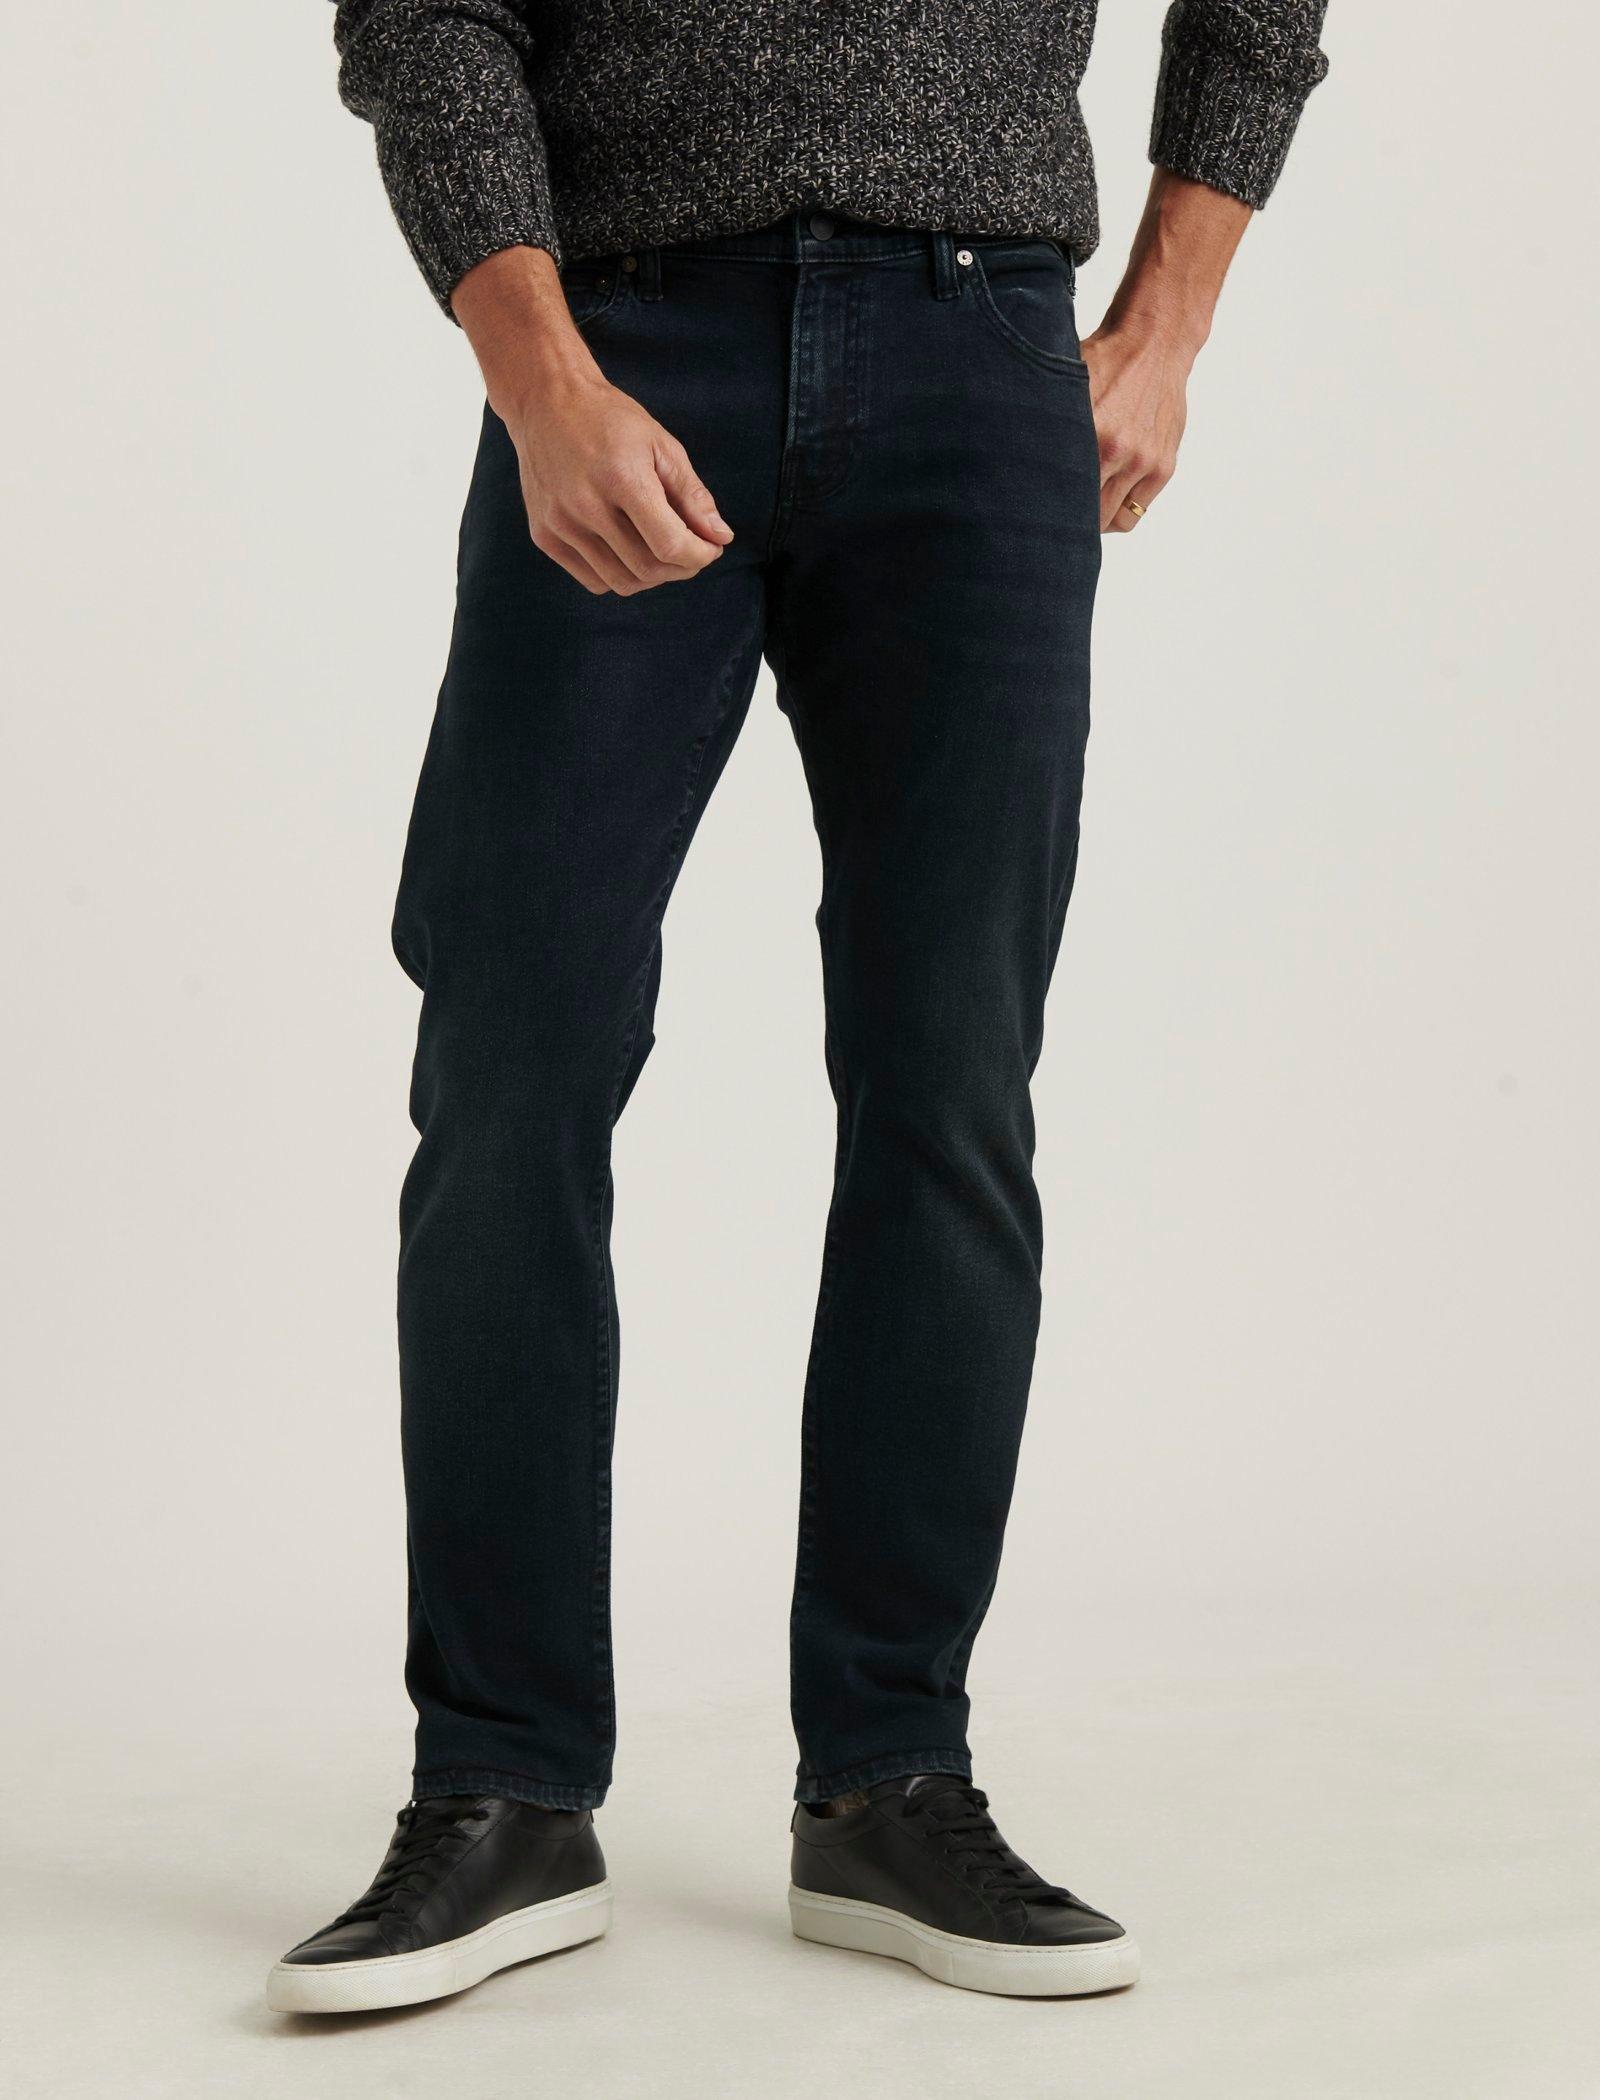 lucky brand mens jeans sale